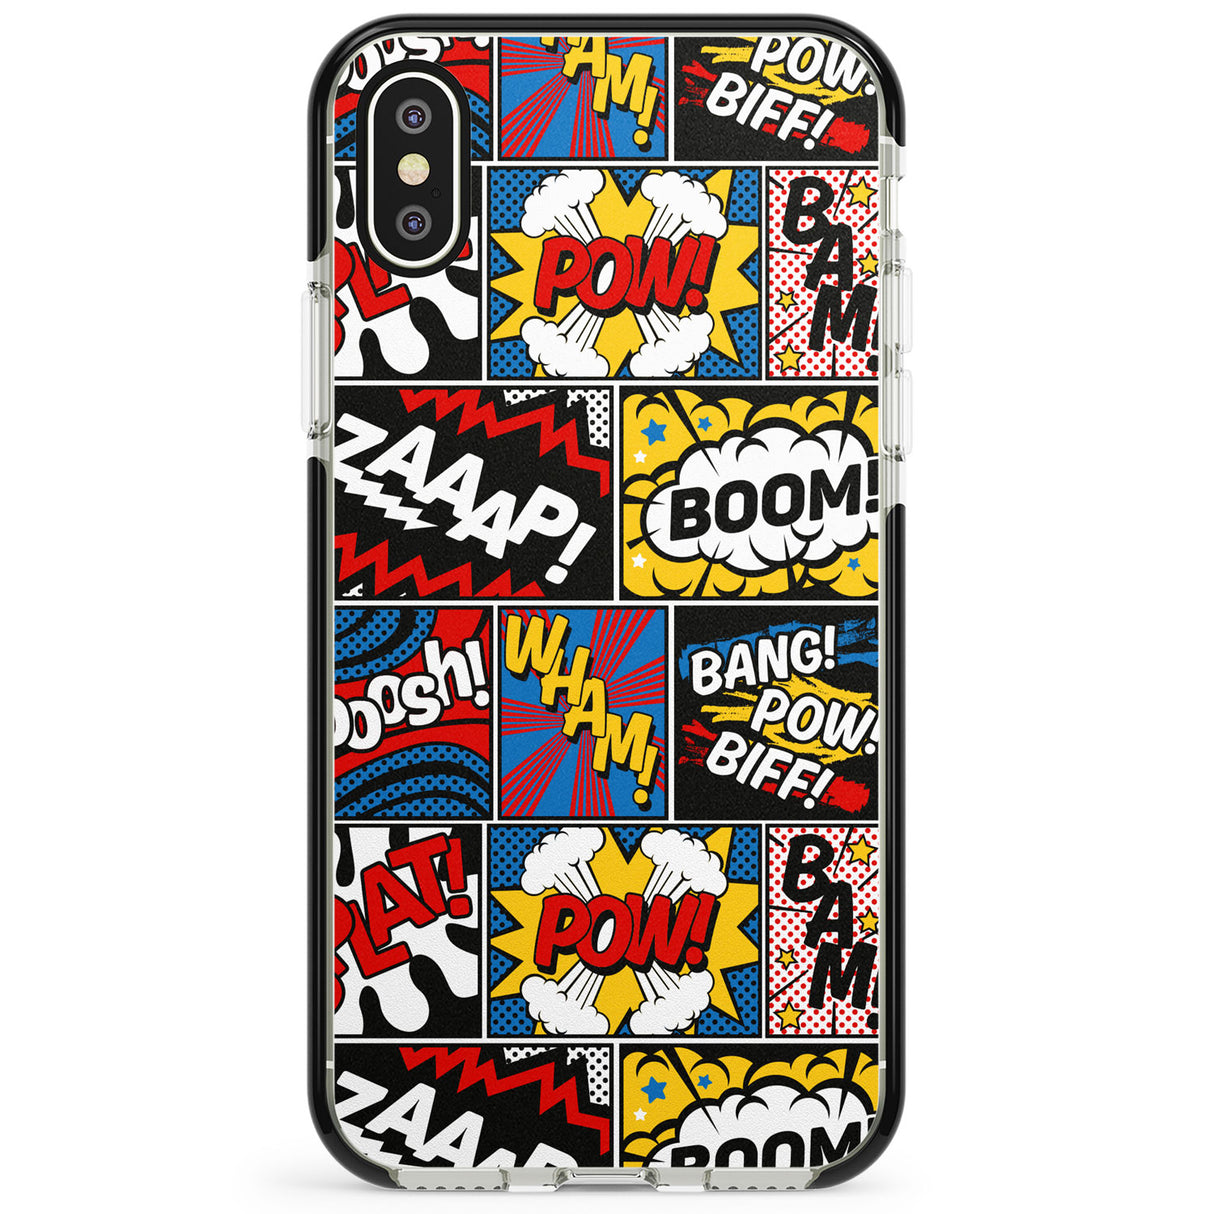 Onomatopoeia Phone Case for iPhone X XS Max XR